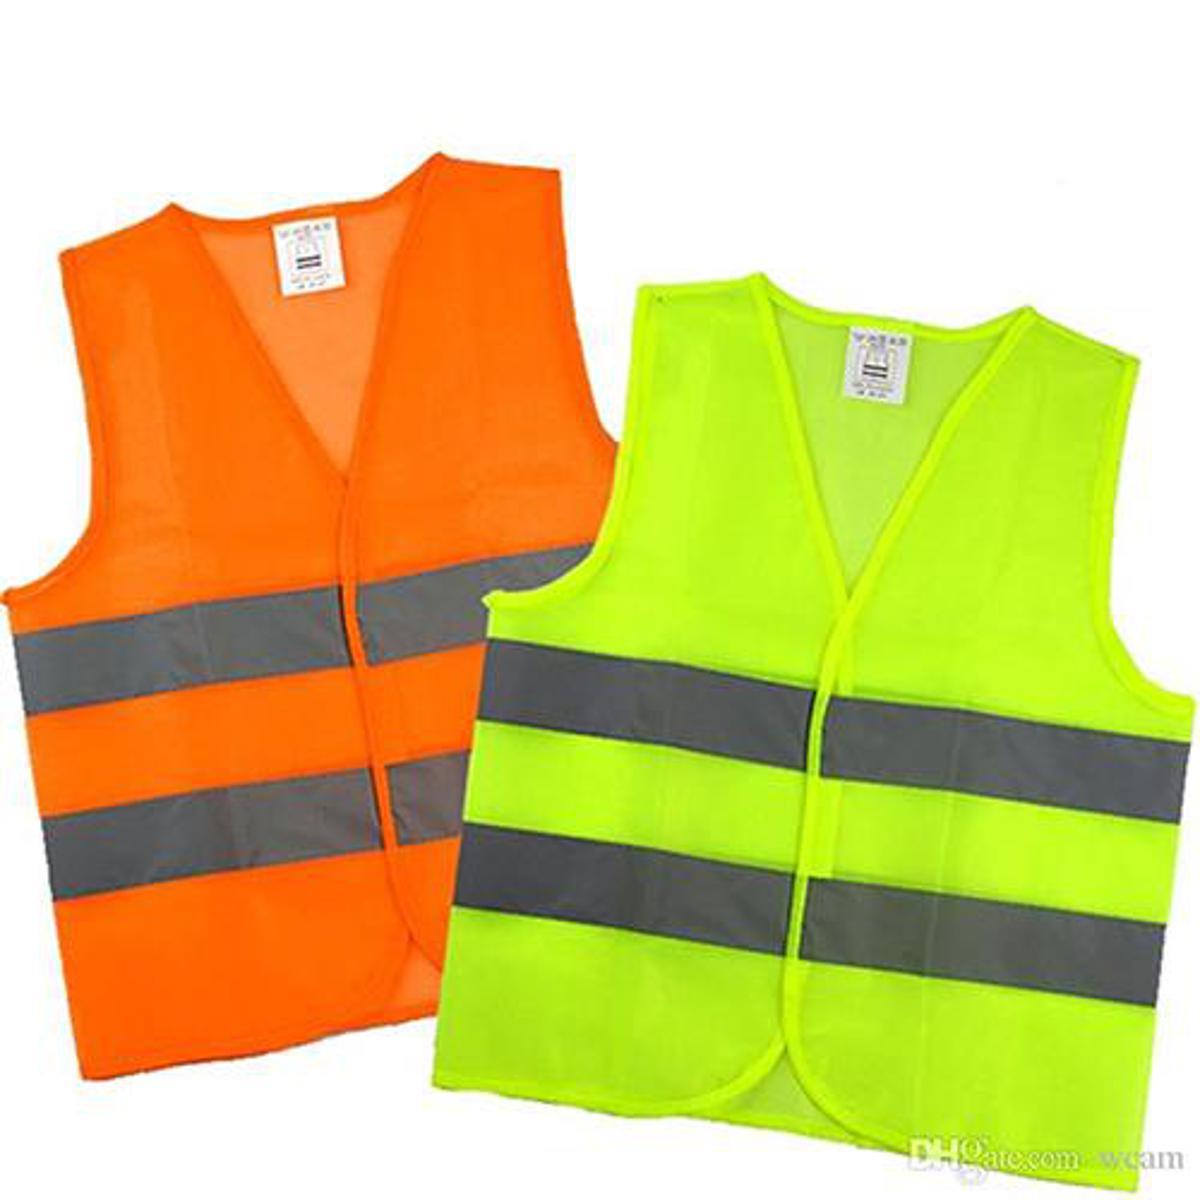 33,955 Construction Jackets Royalty-Free Photos and Stock Images |  Shutterstock